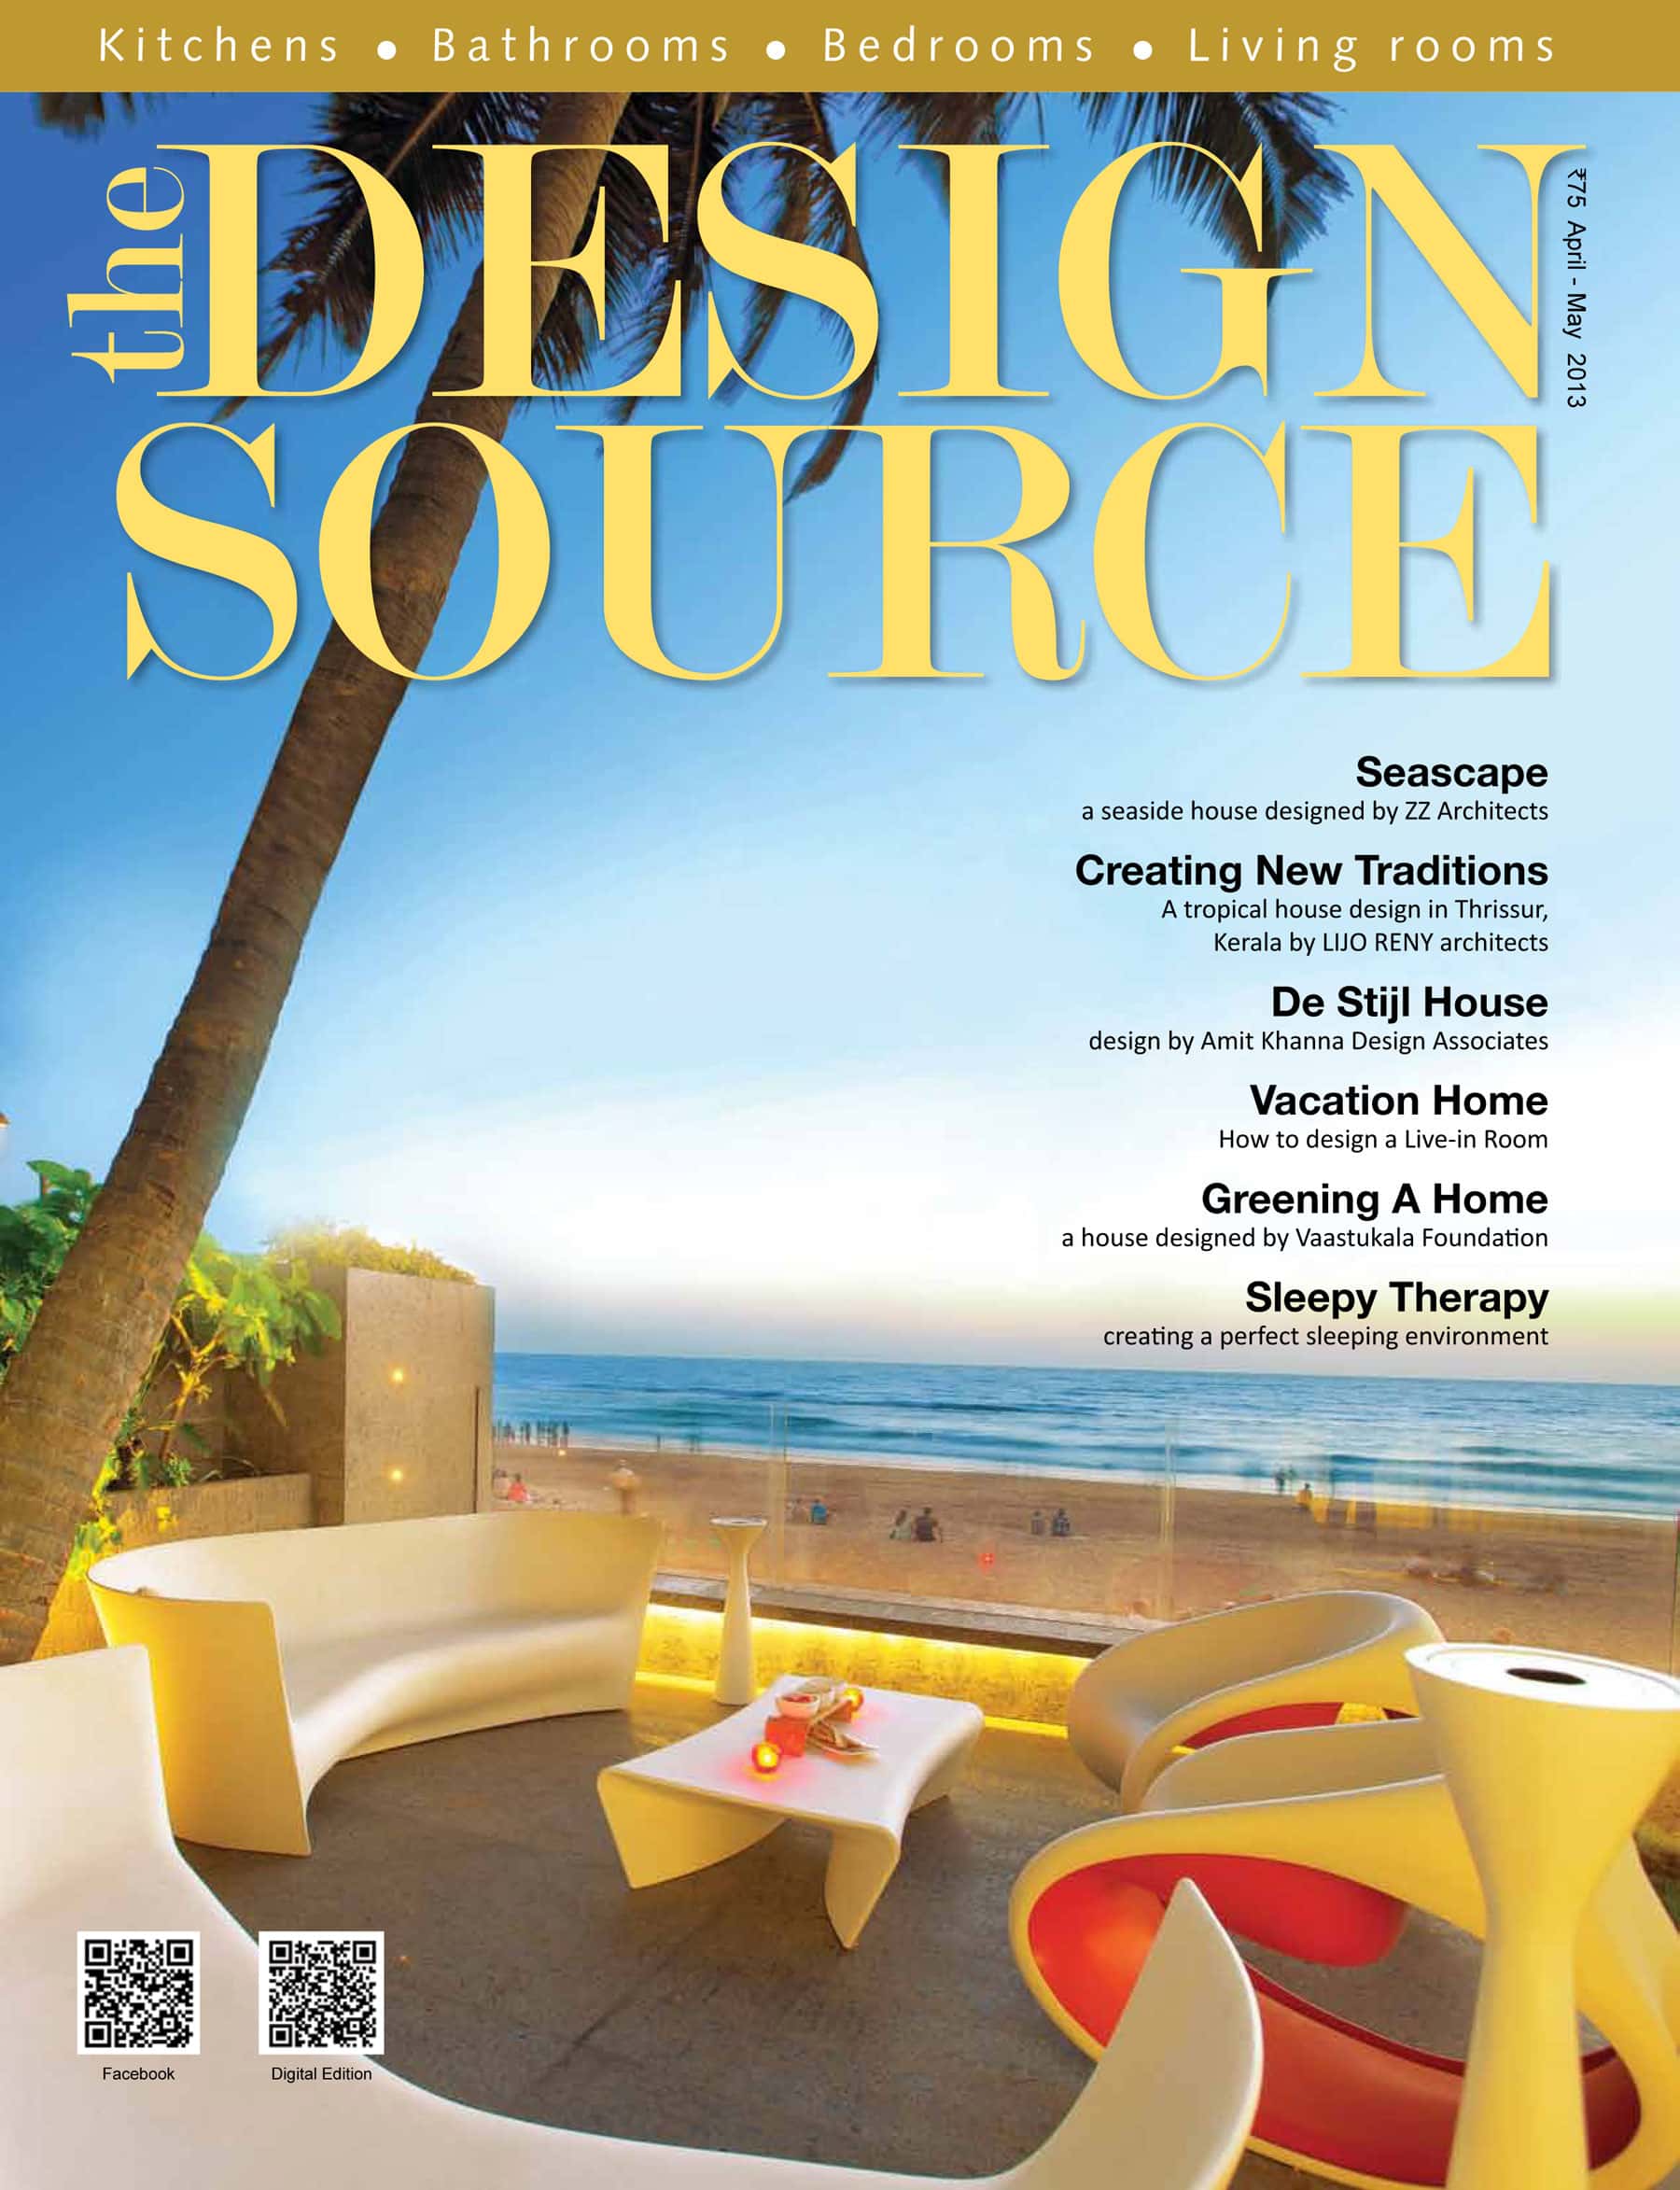 he-design-source-magazine-india-covers-the-residence-at-punkunnam-9